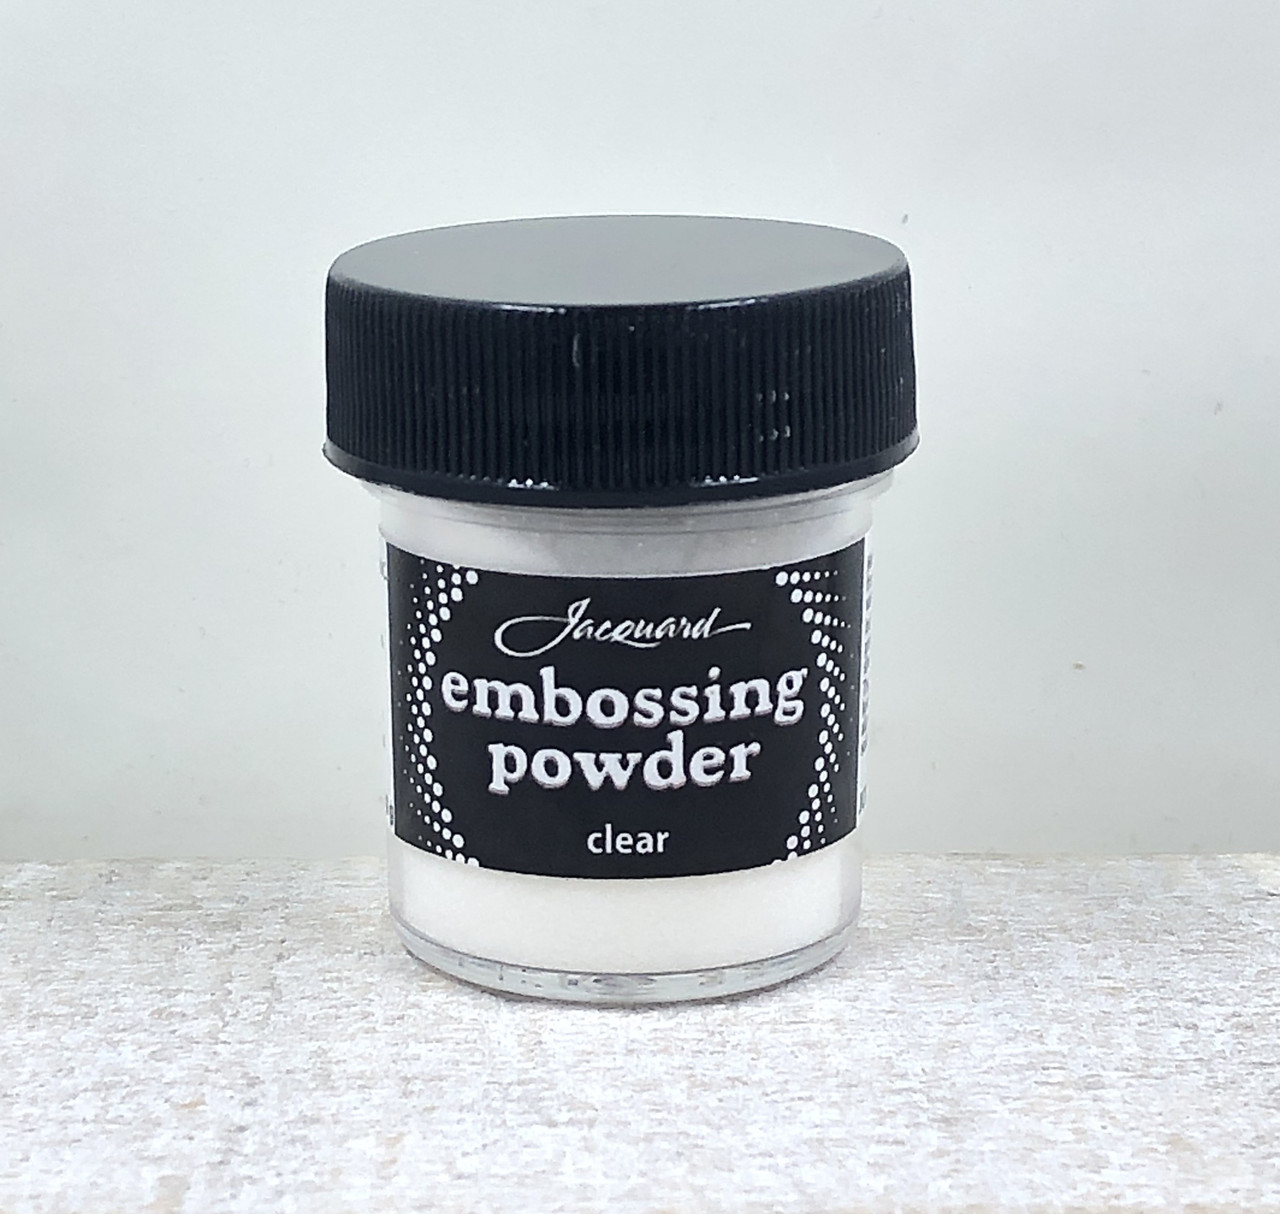 Jacquard Embossing Powder, 8g - Clear - Scrapbooking Made Simple